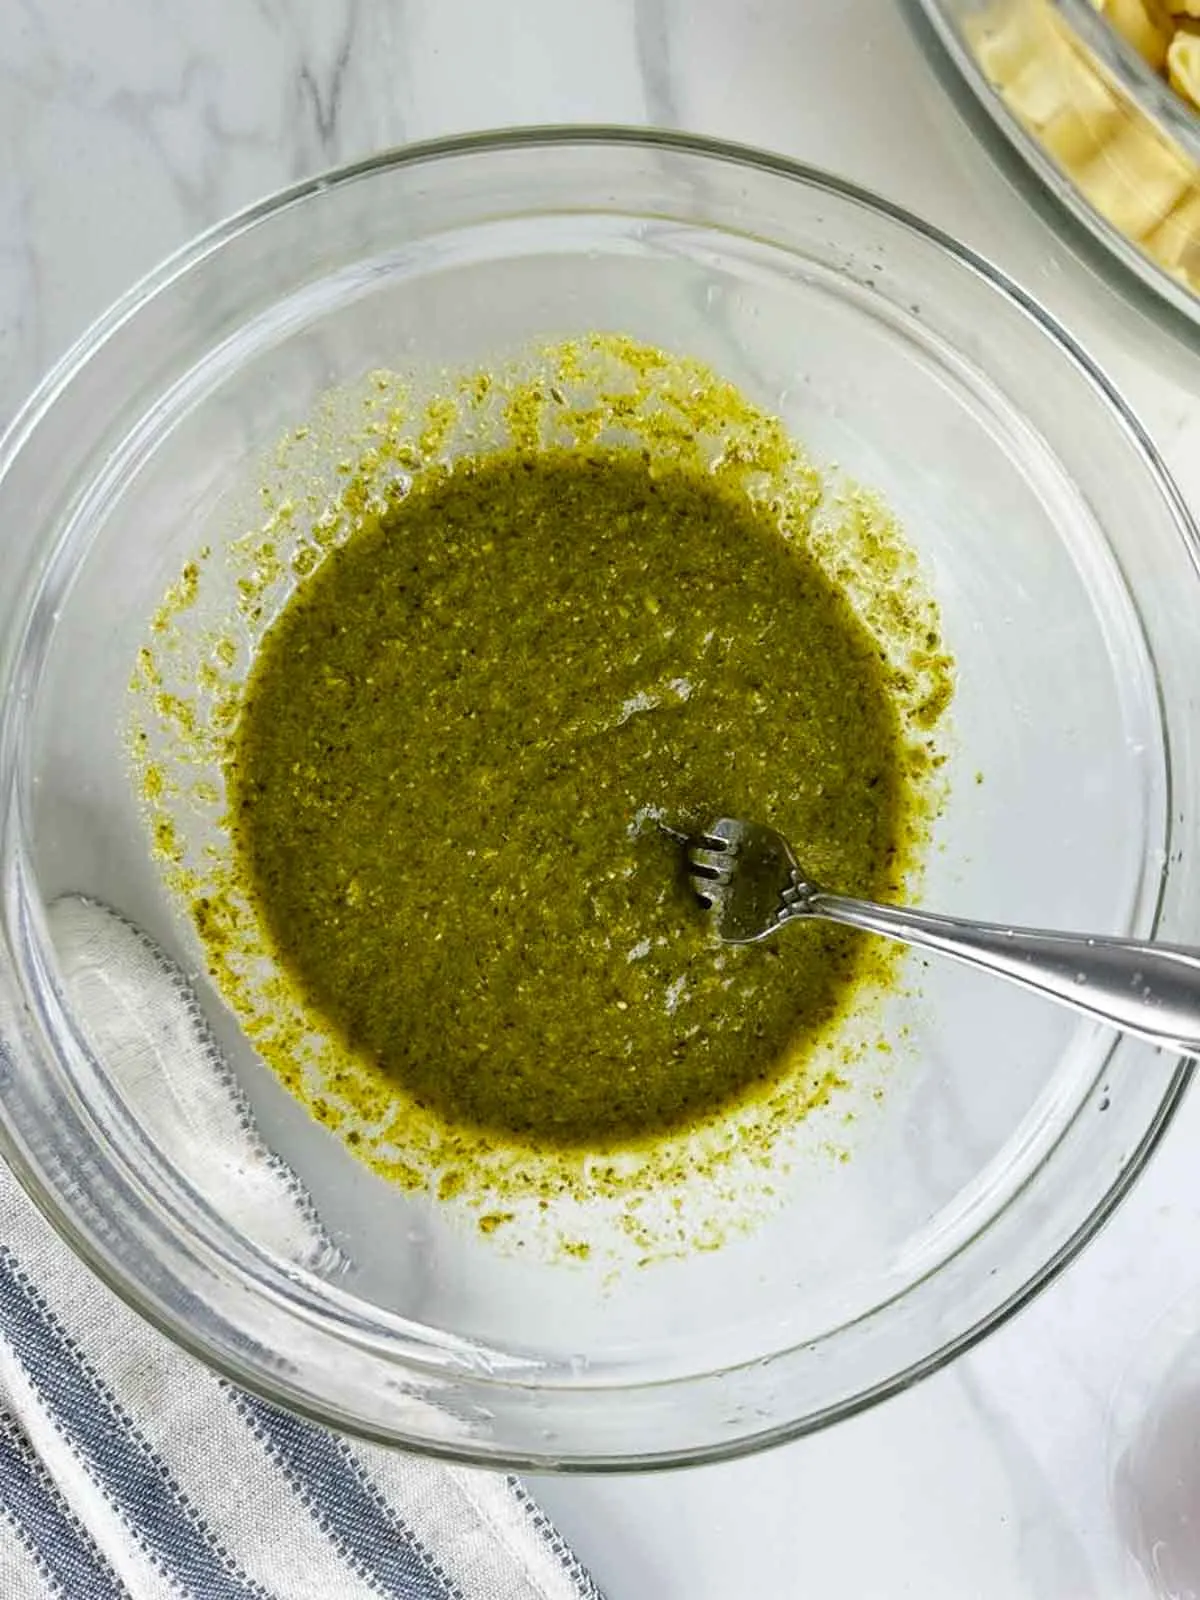 Pesto and lemon juice in a bowl stirred together to a thinner consistency than regular pesto.